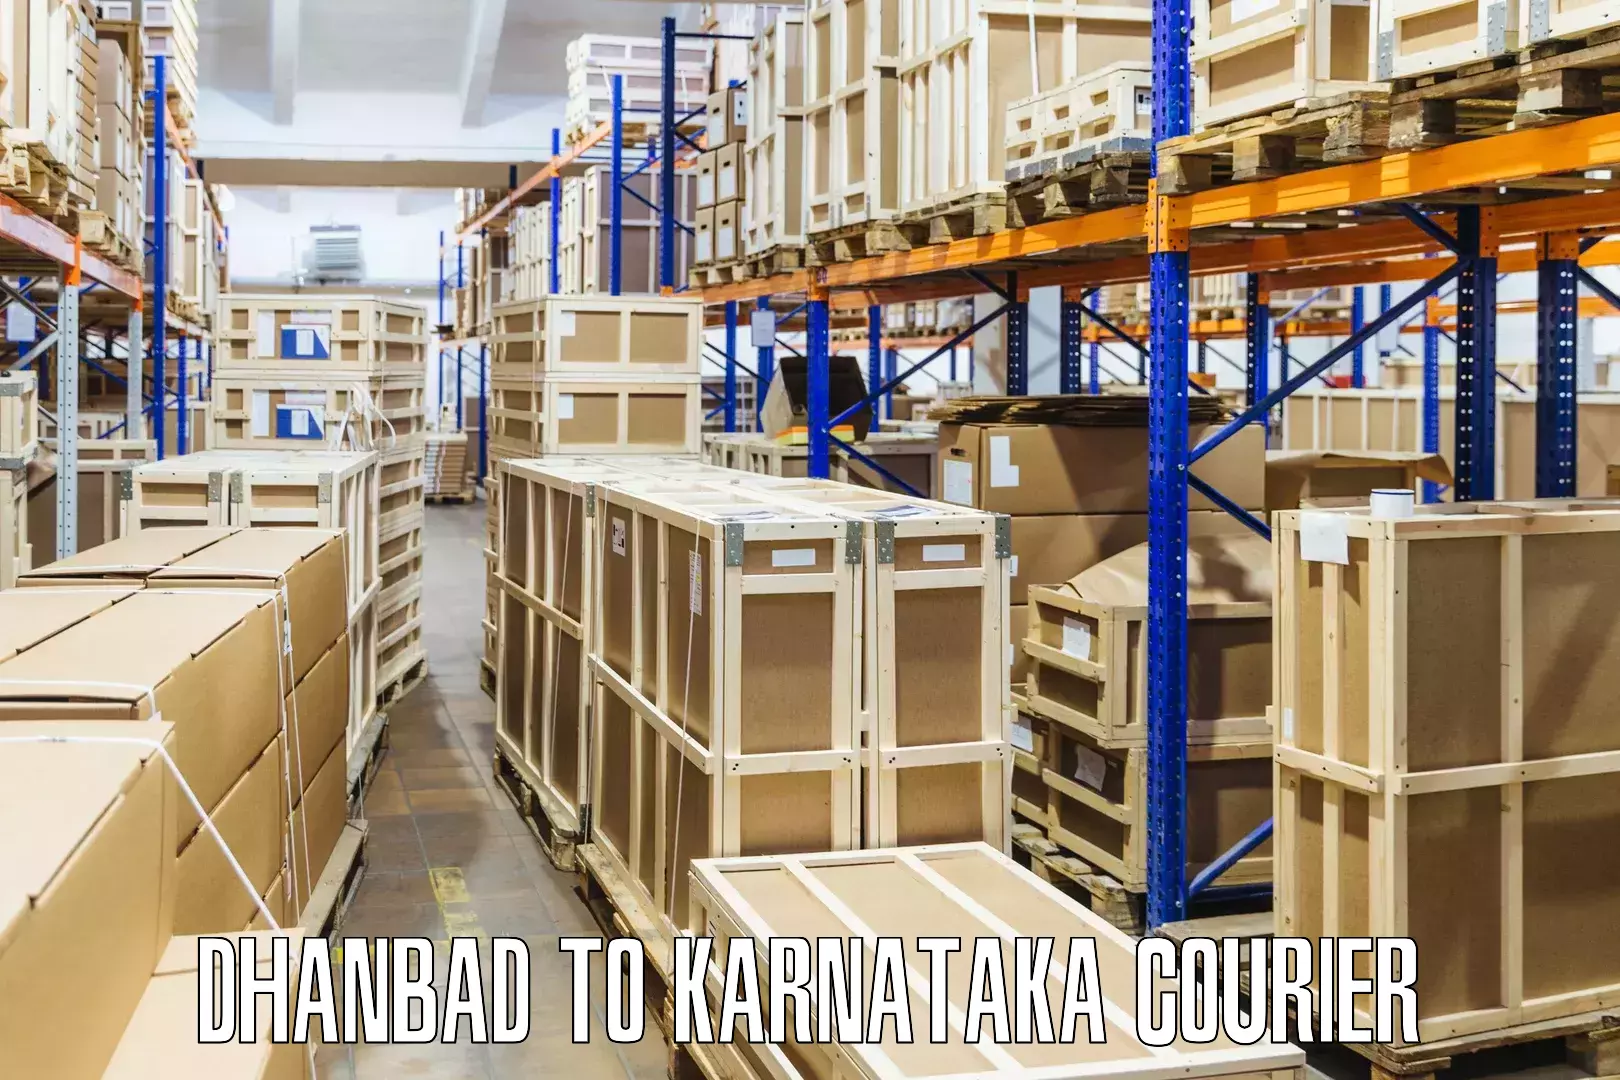 State-of-the-art courier technology Dhanbad to Channapatna